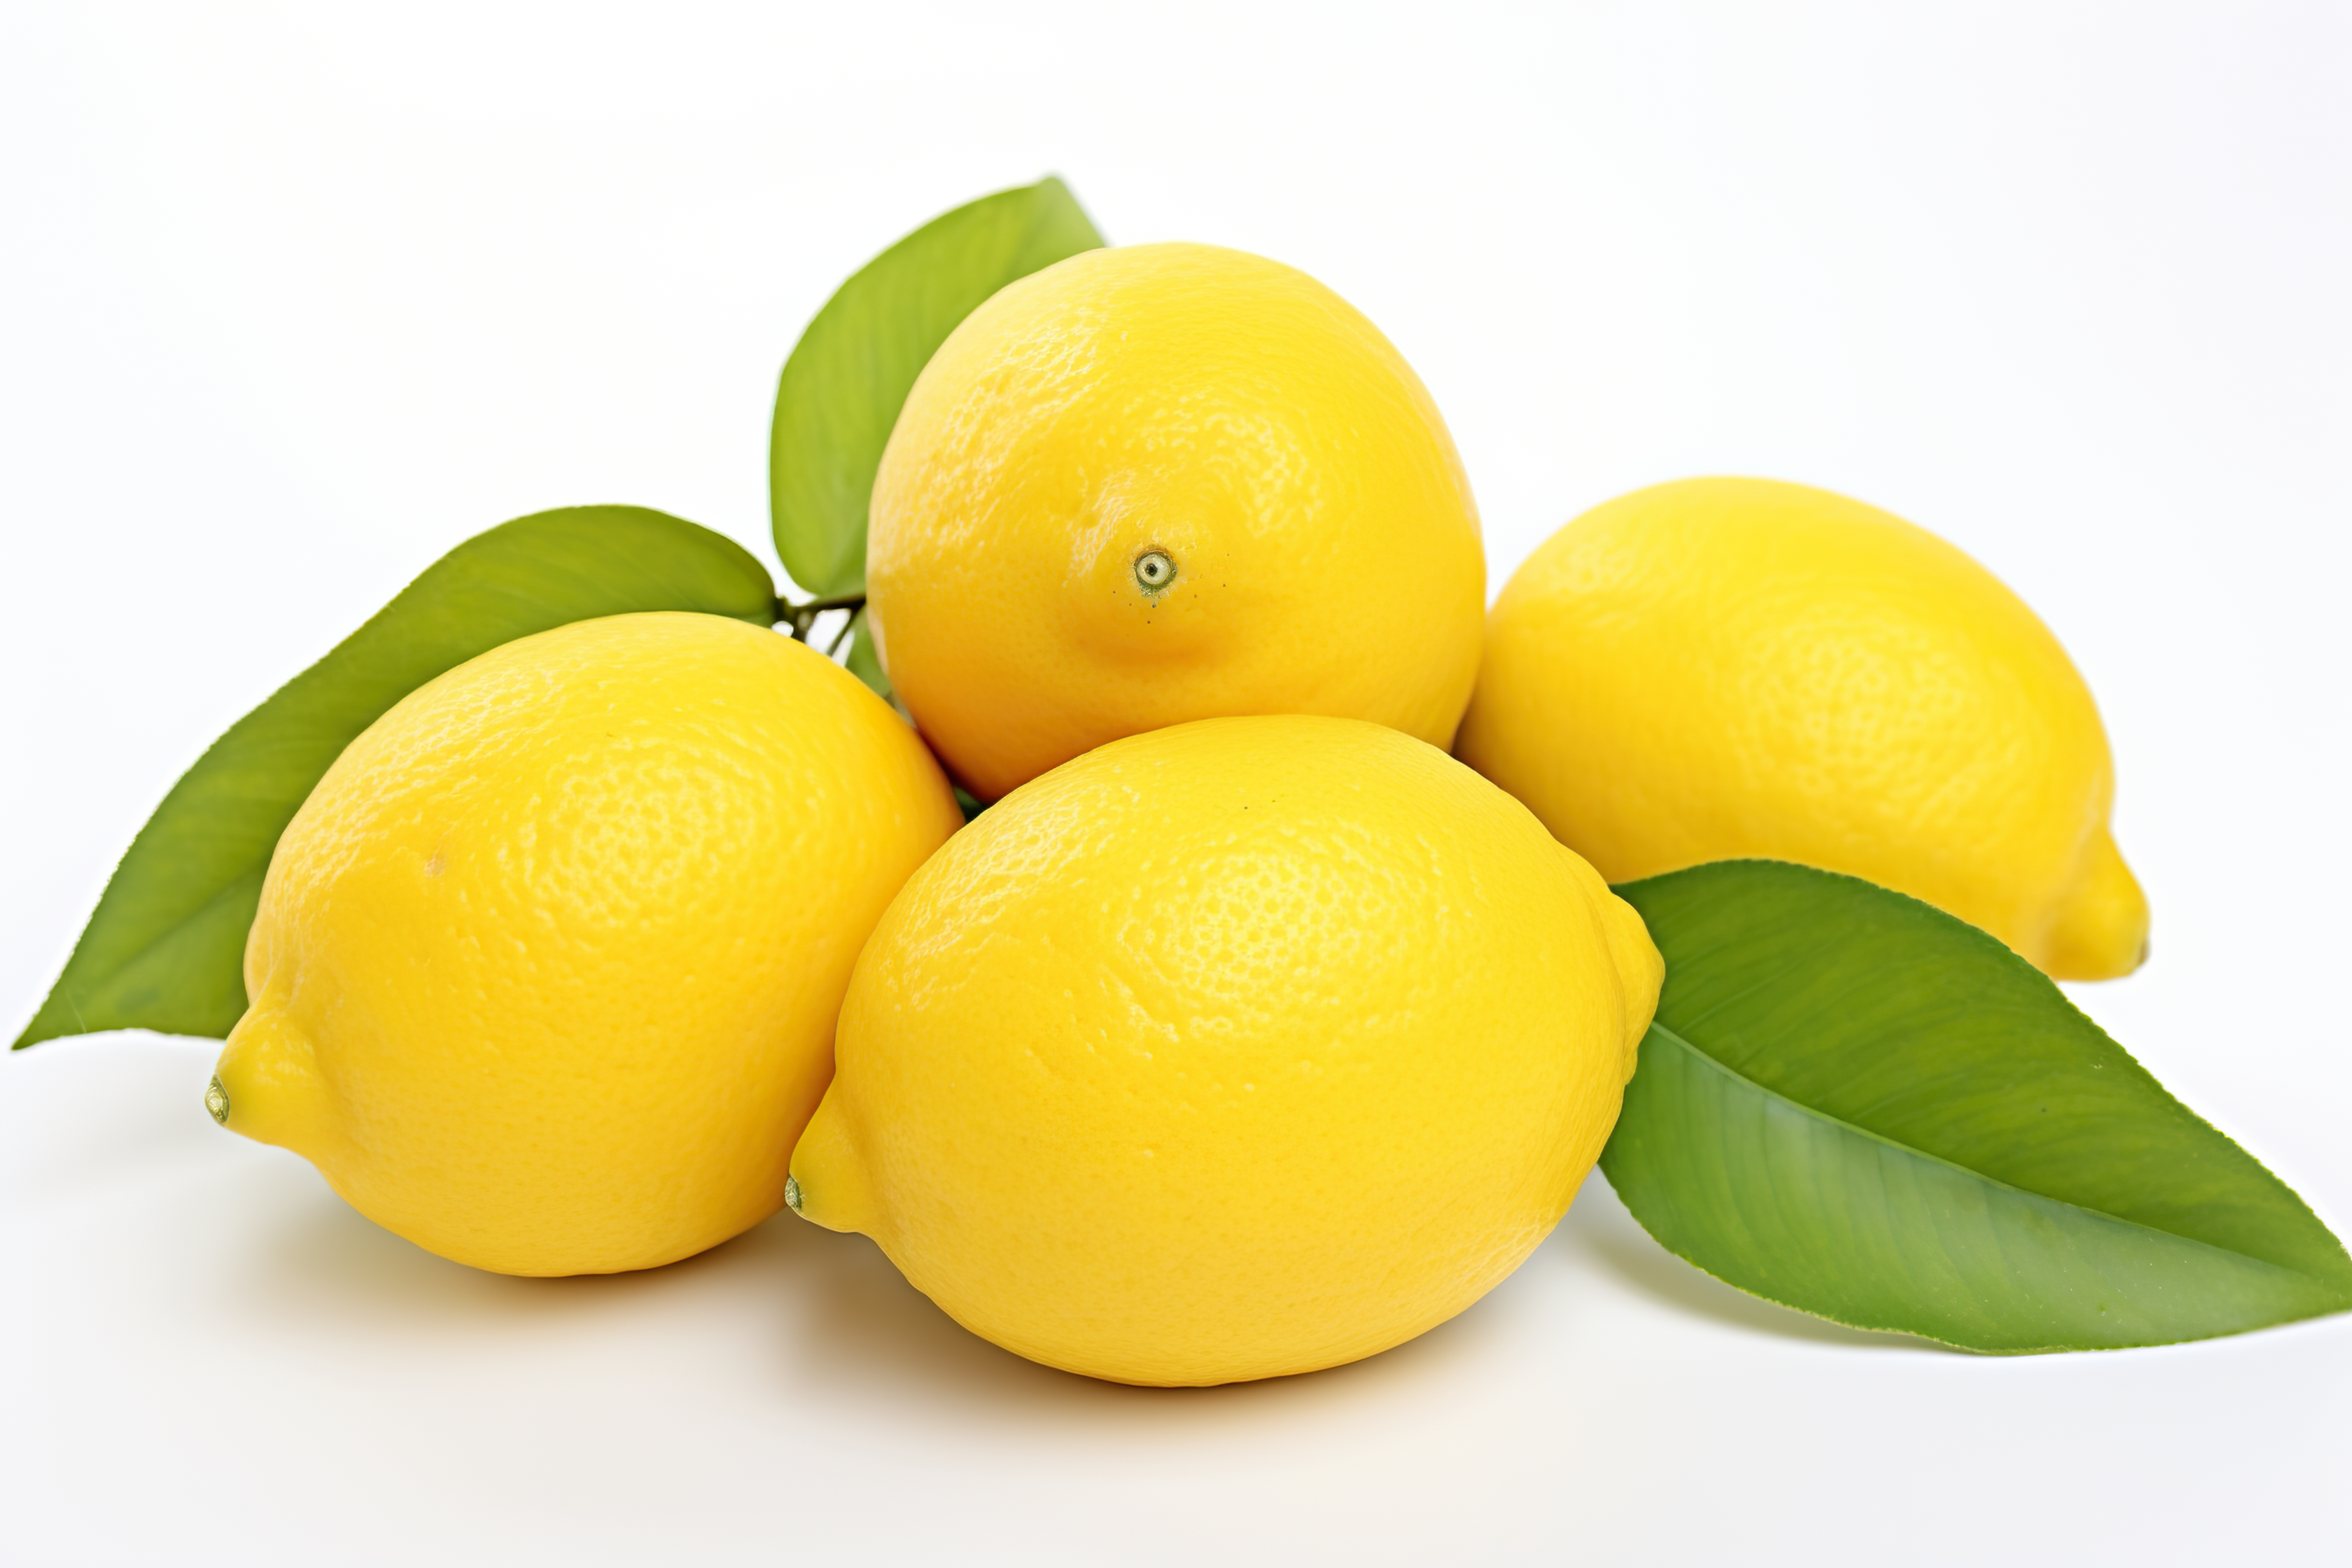 Juicy lemon with leaves isolated on white background